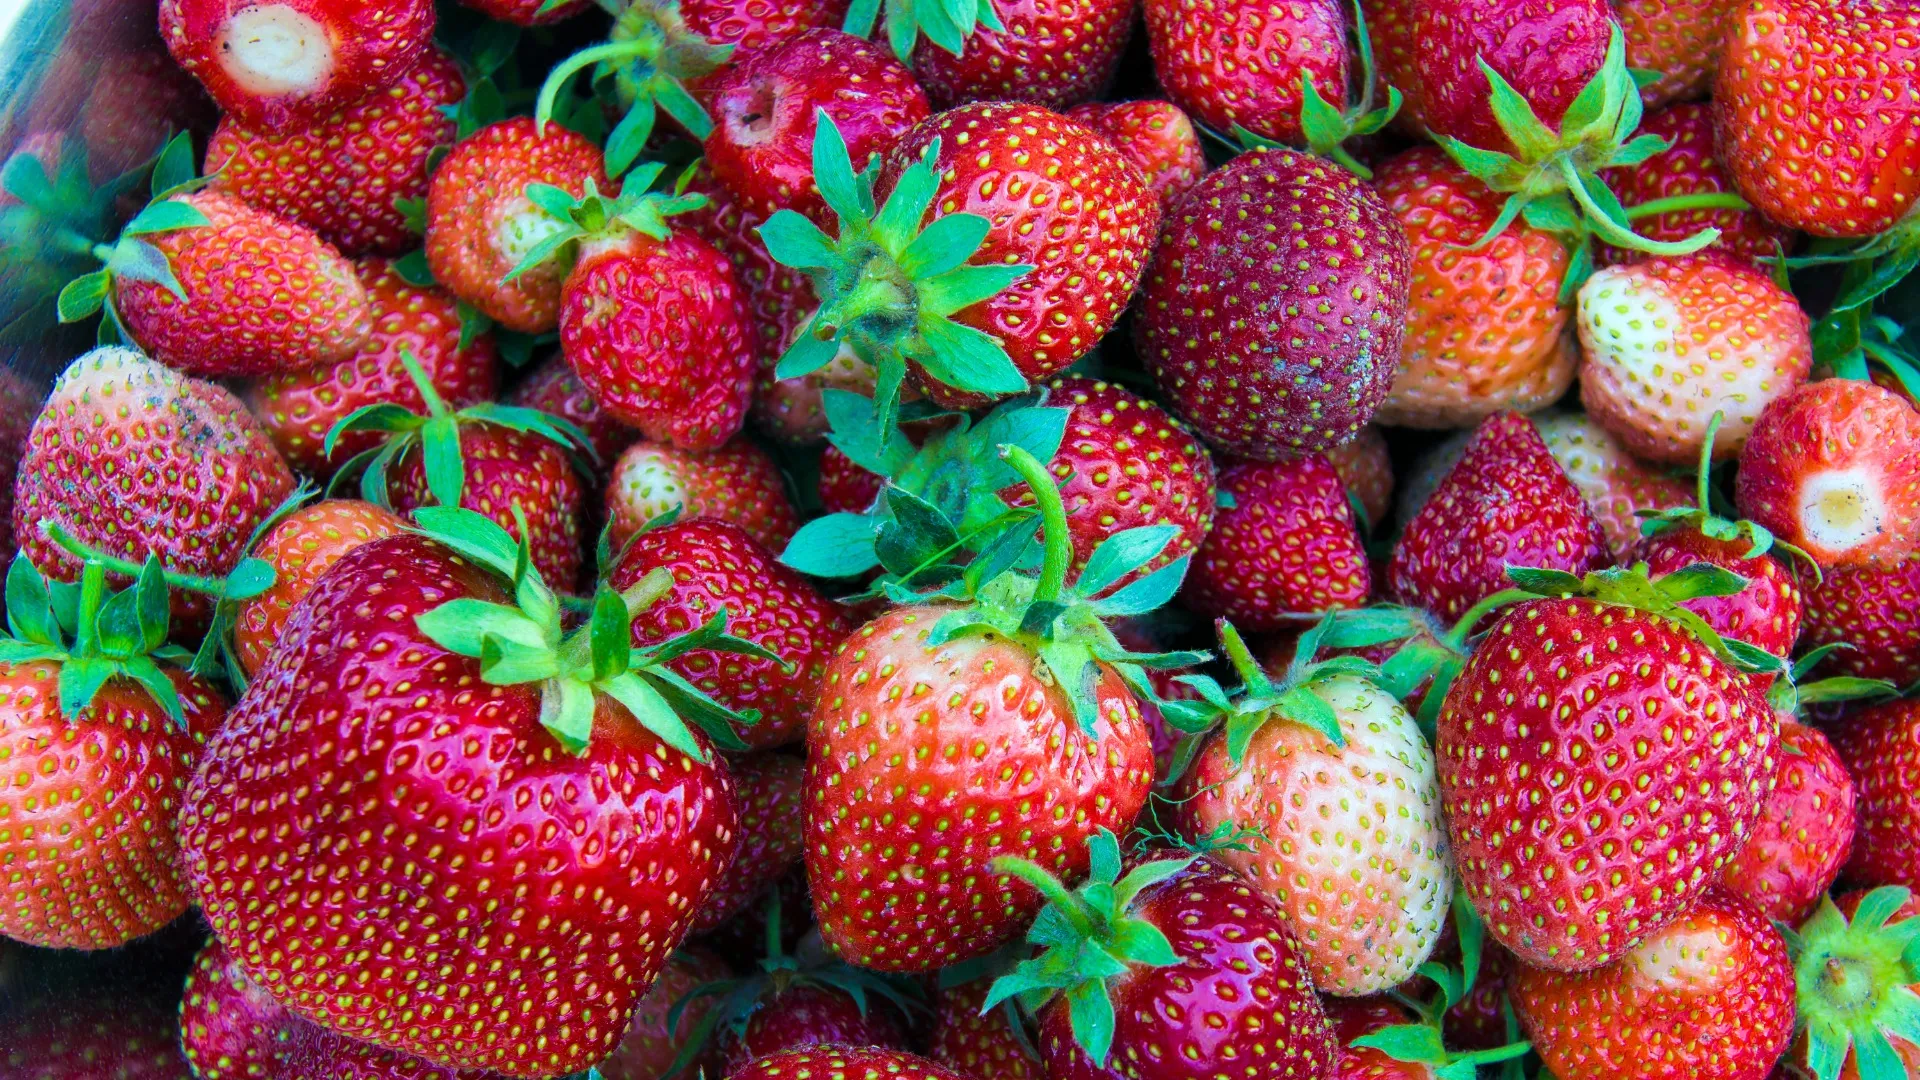 Strawberries Top The “Dirty Dozen” List in 2023: Here Are 12 Foods You Need to Buy Organic